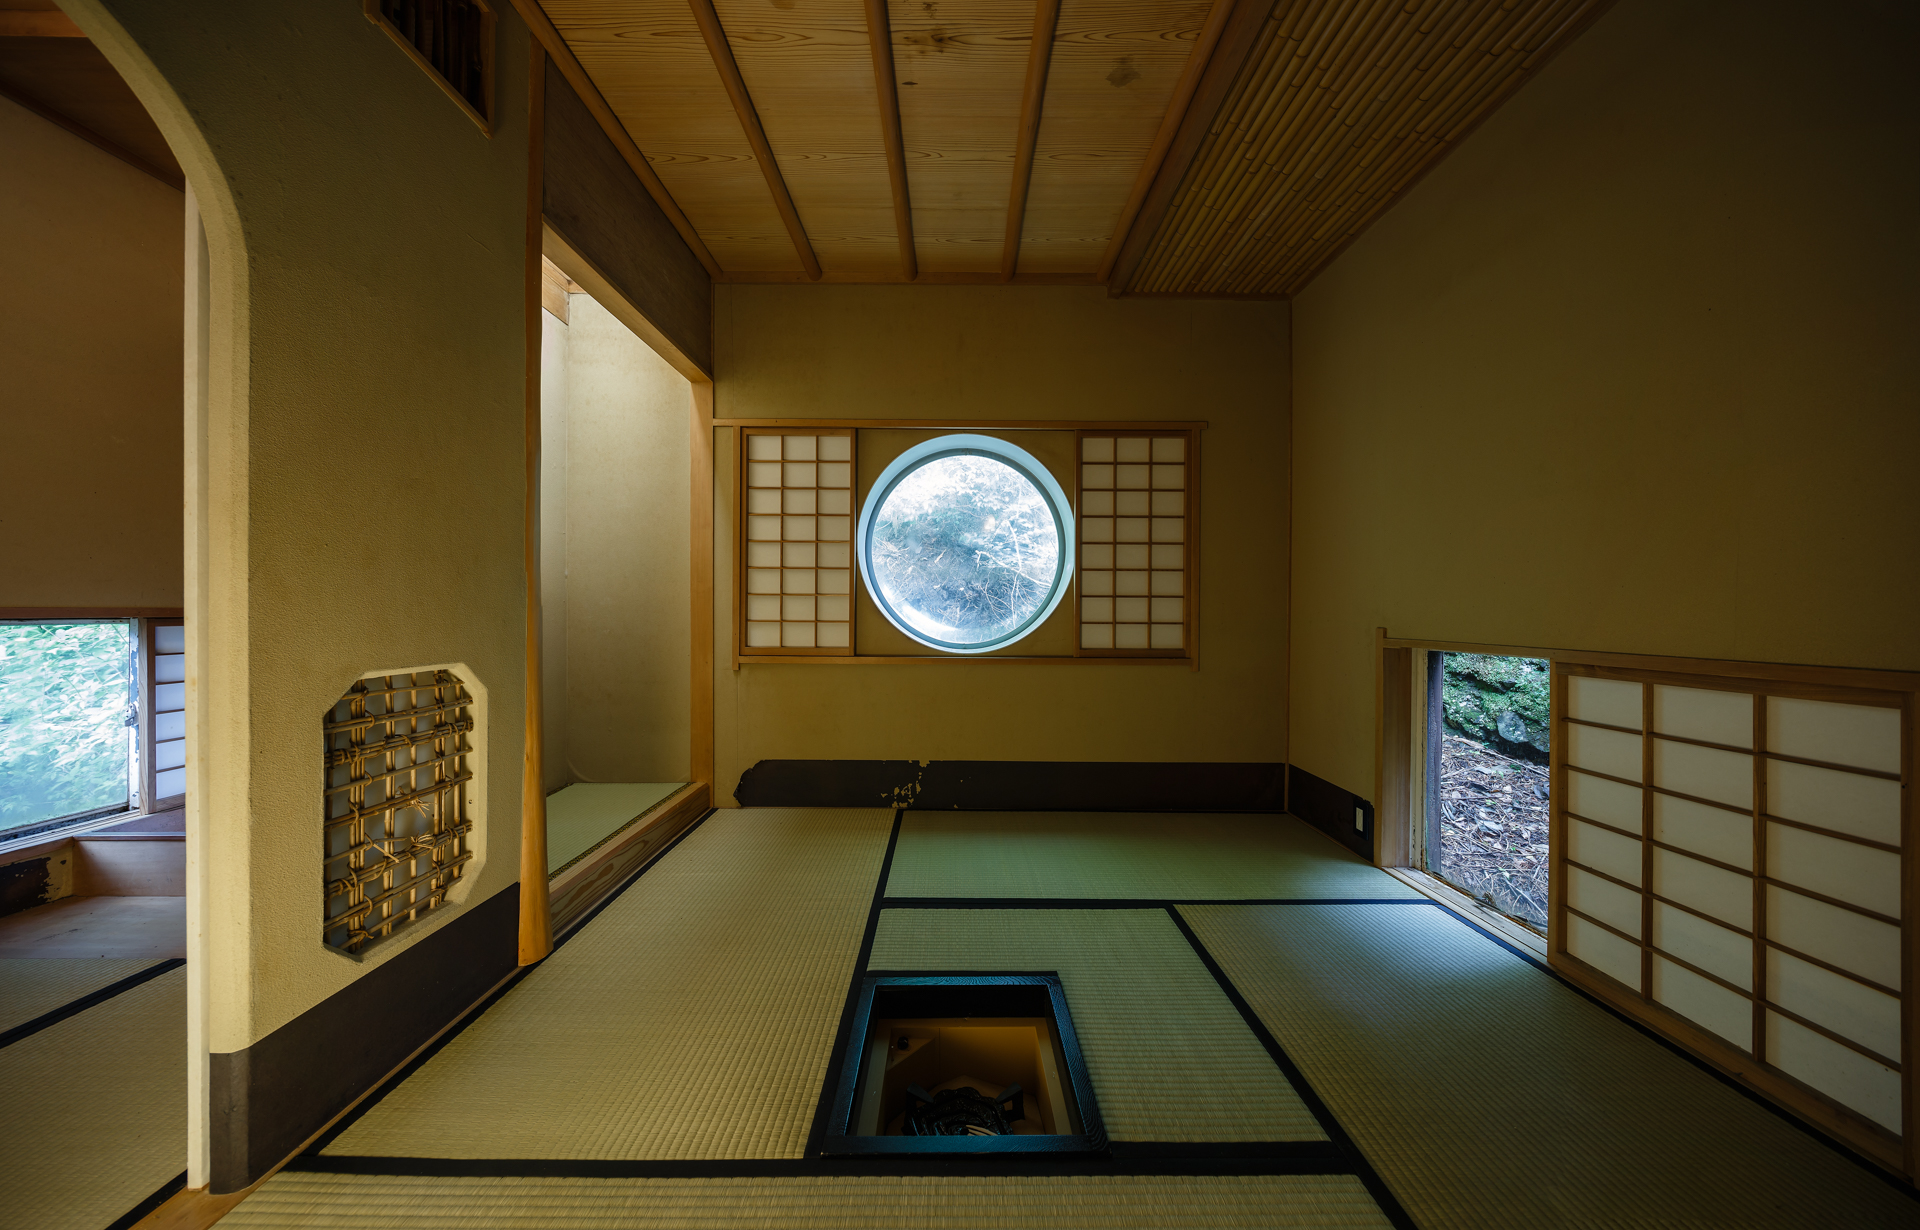 Exceptional Japanese Houses: Residential Design from 1945 to the Present, New York, United States